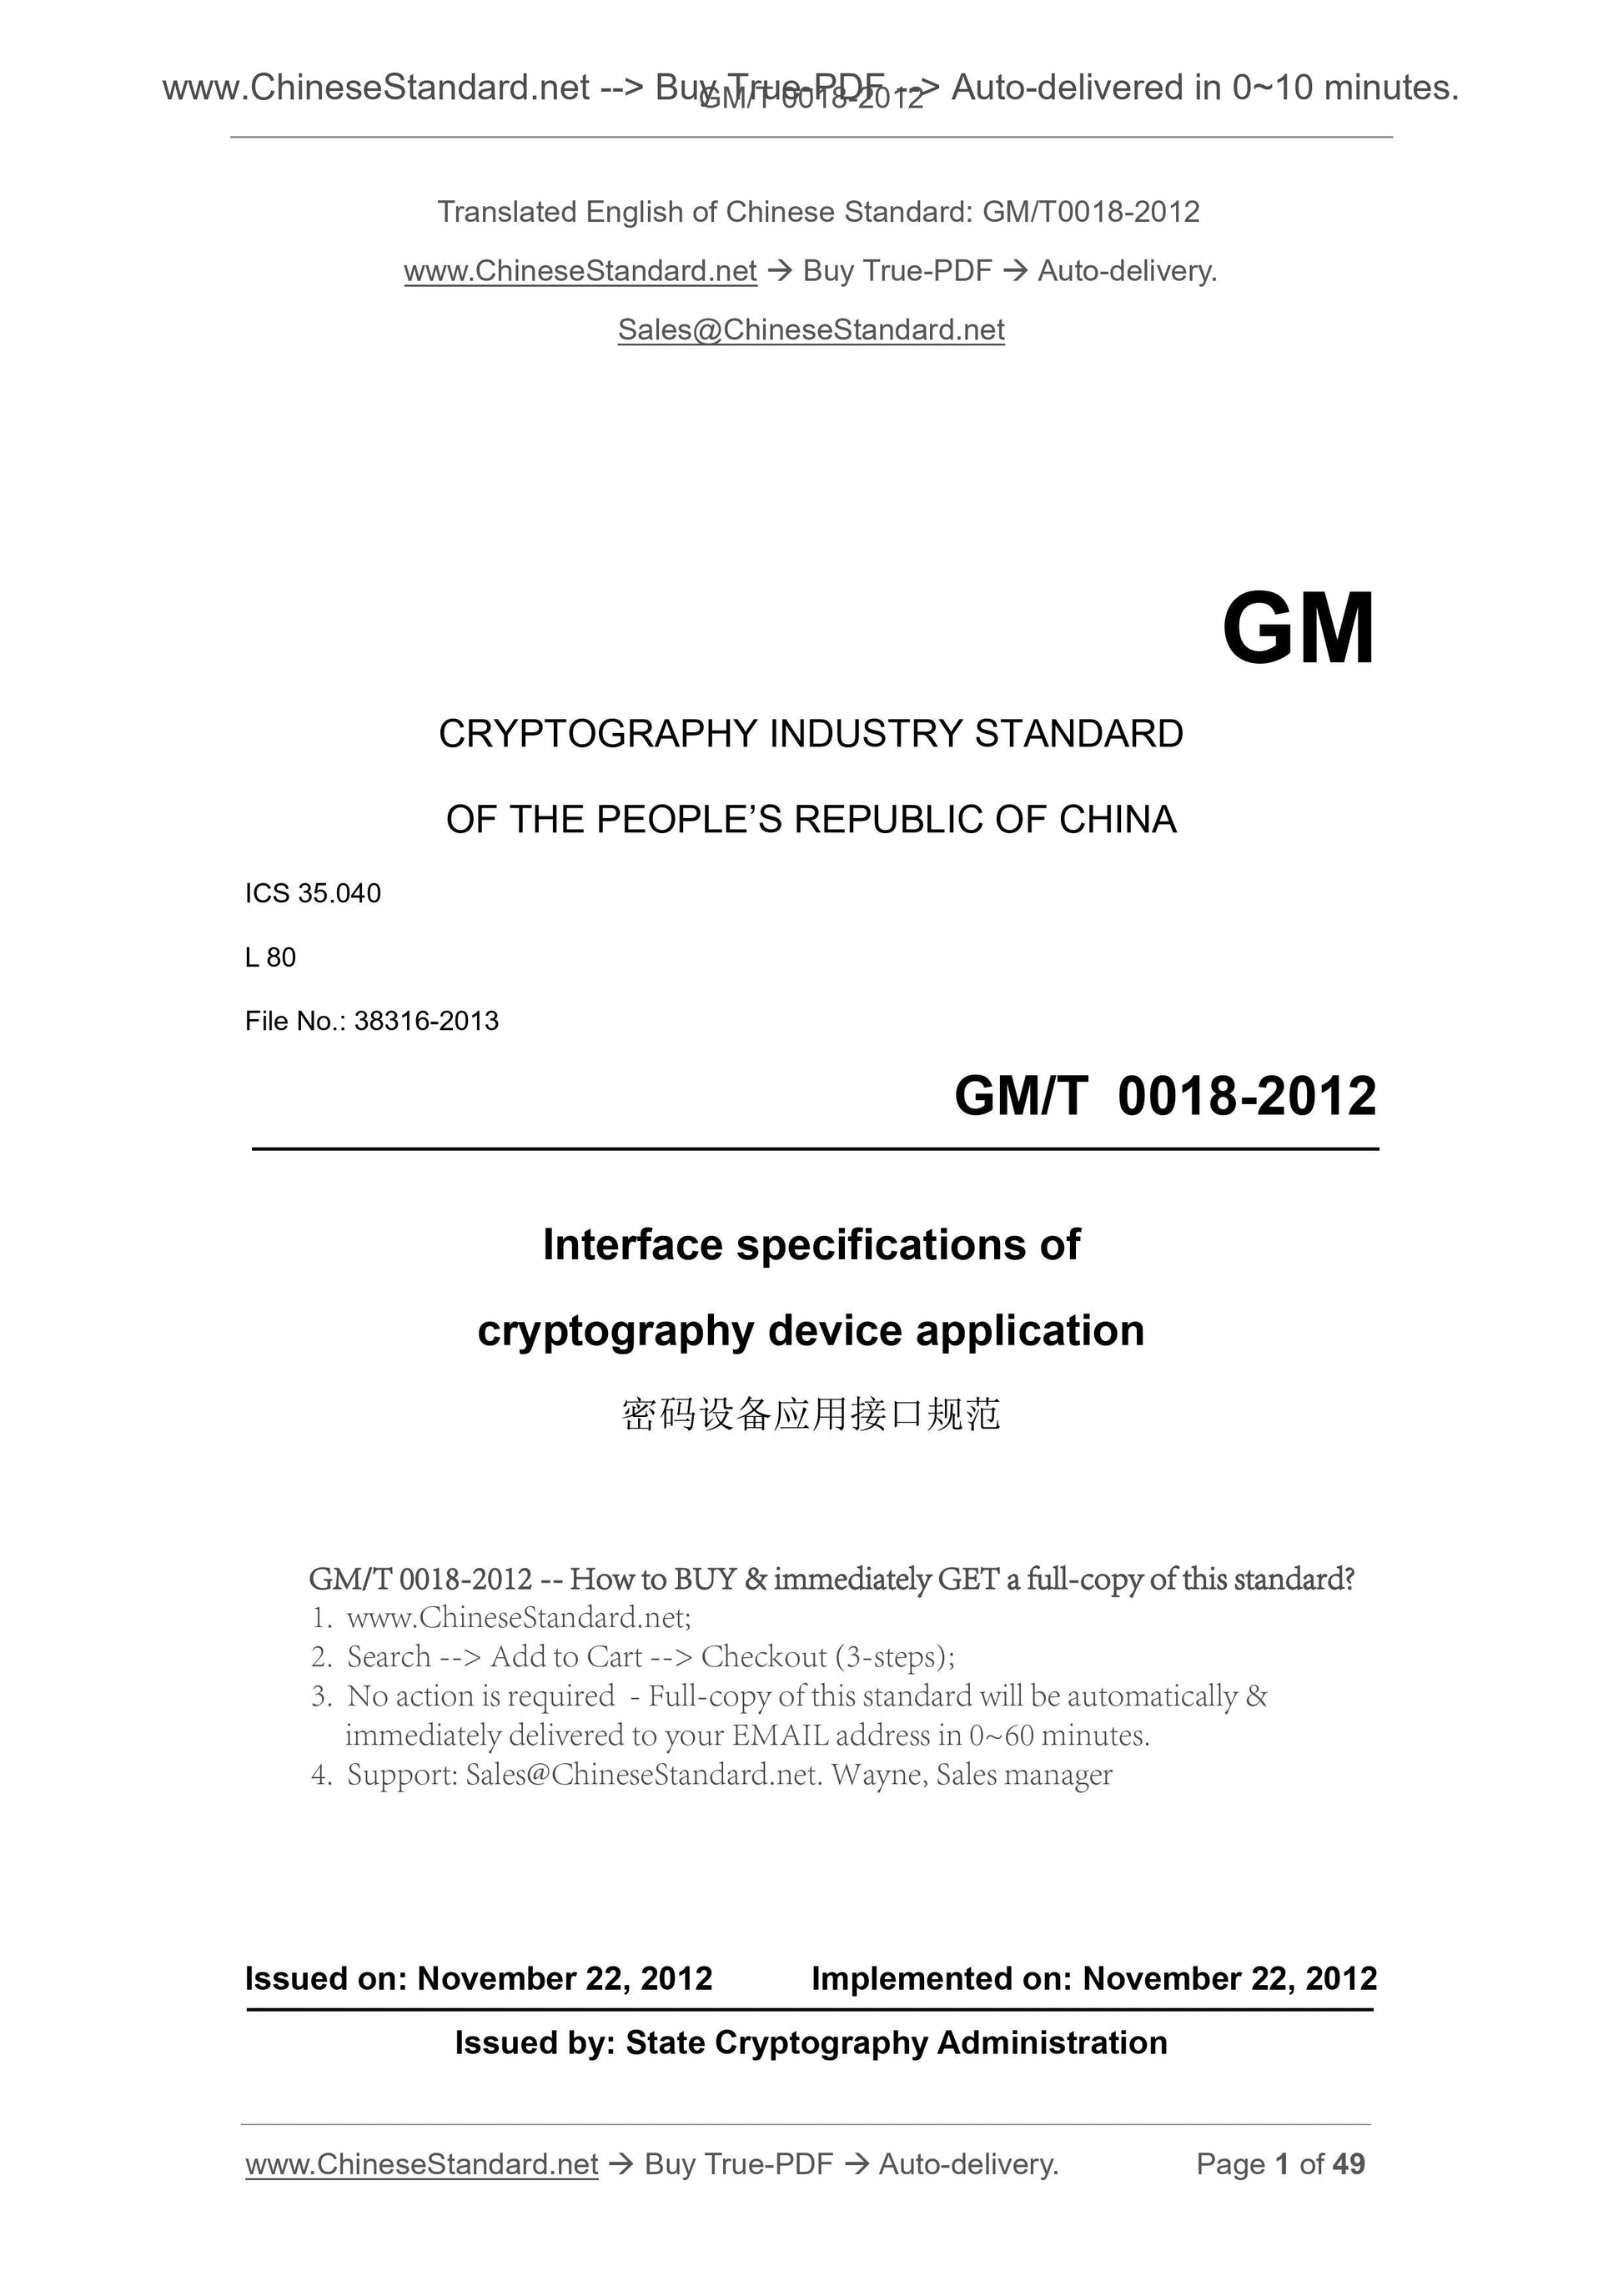 GM/T 0018-2012 Page 1